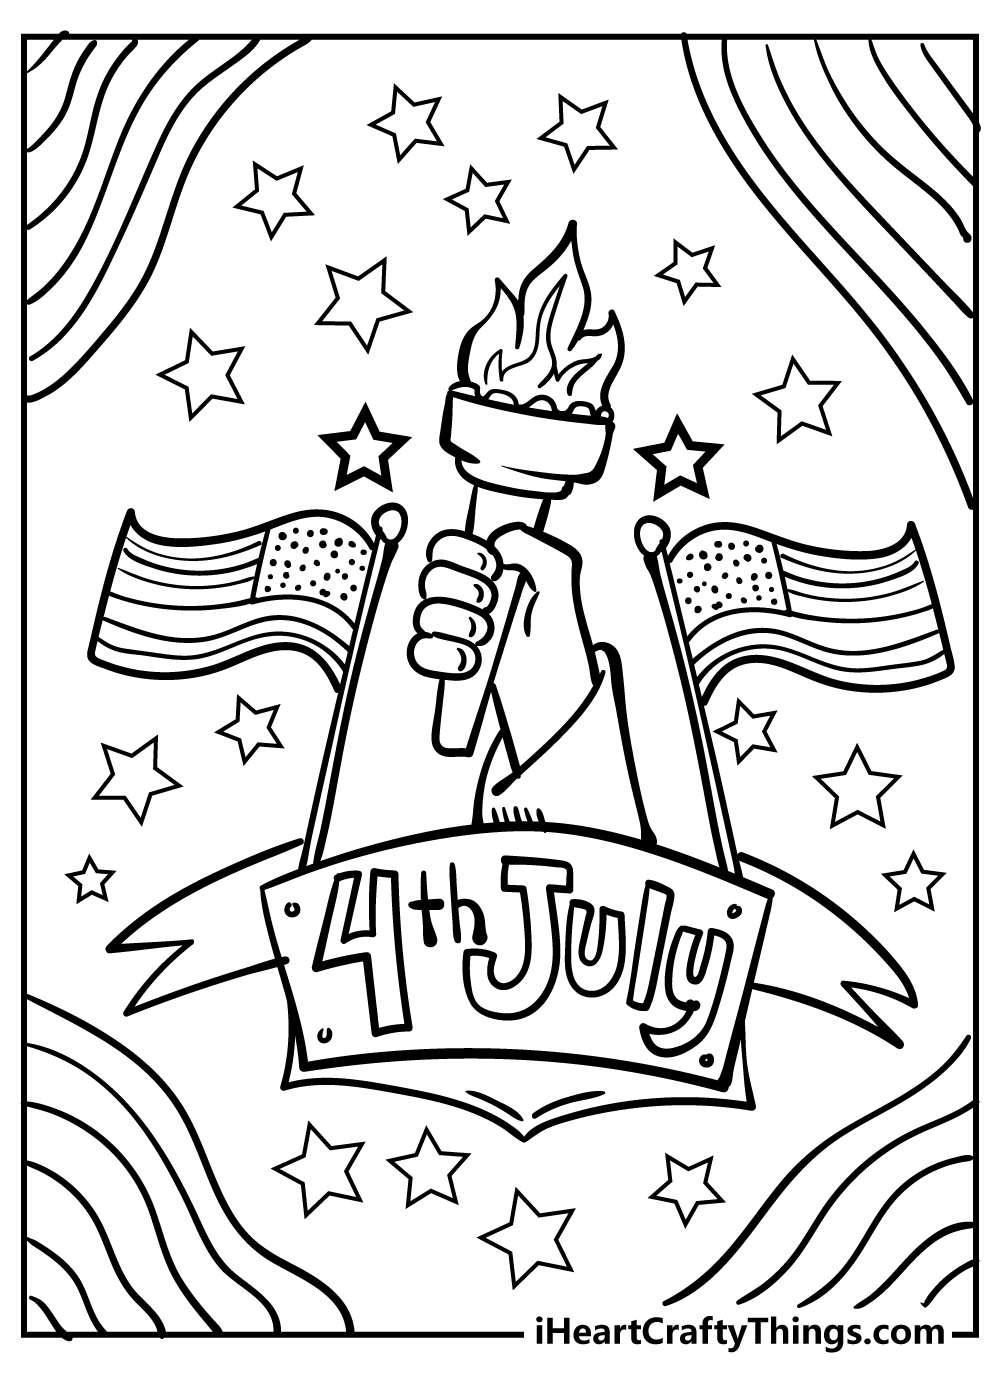 Celebrate Freedom with 4th of July: 180+ Free Coloring Pages 91